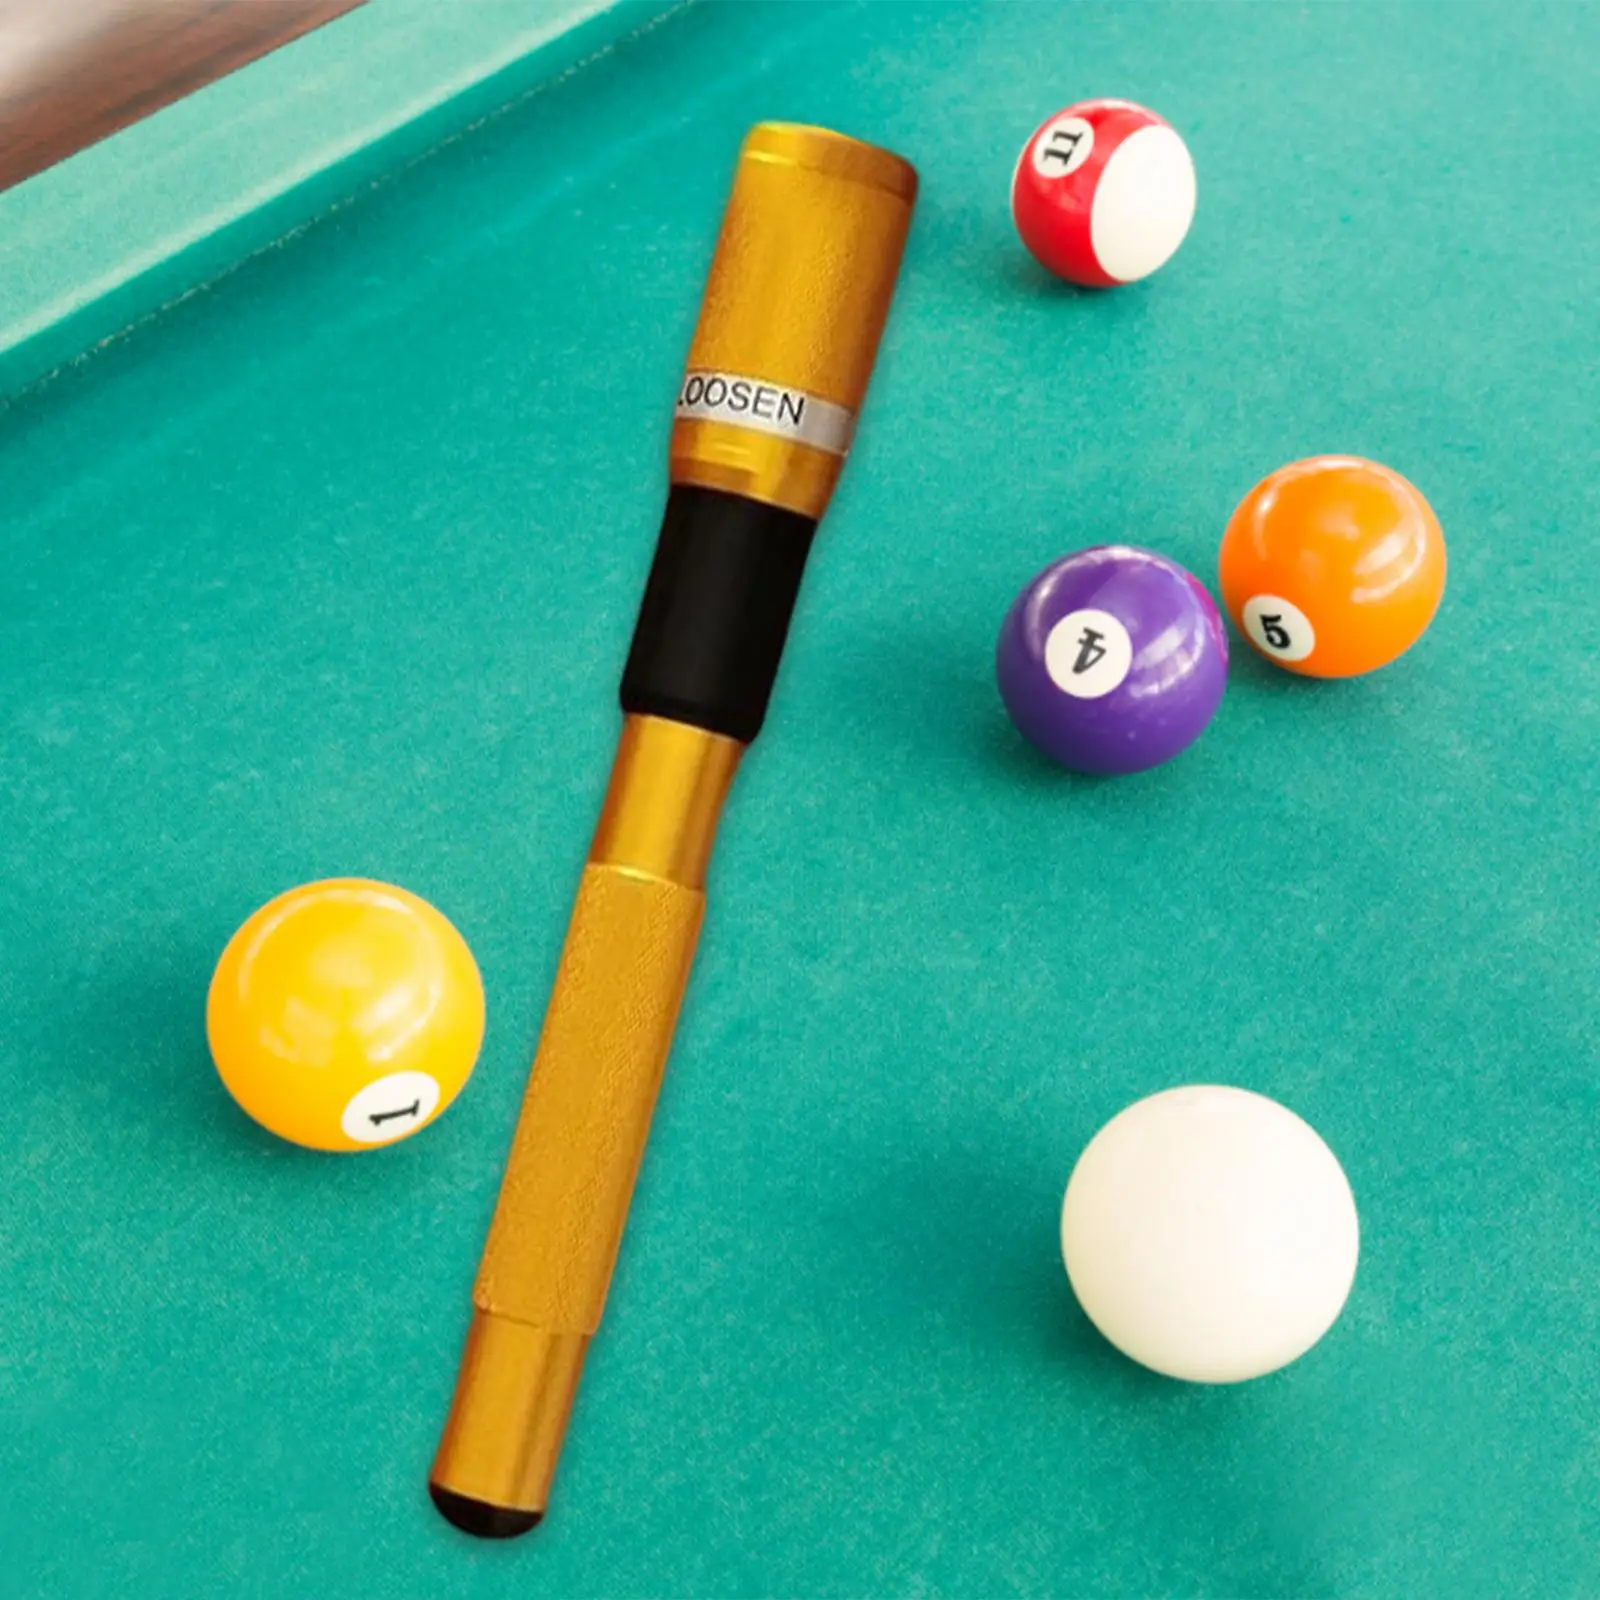 Telescopic Pool Cue Extension Snooker Pool Cue Extender Billiards Cue Extension for 32cm Billiard Cues Nine Ball